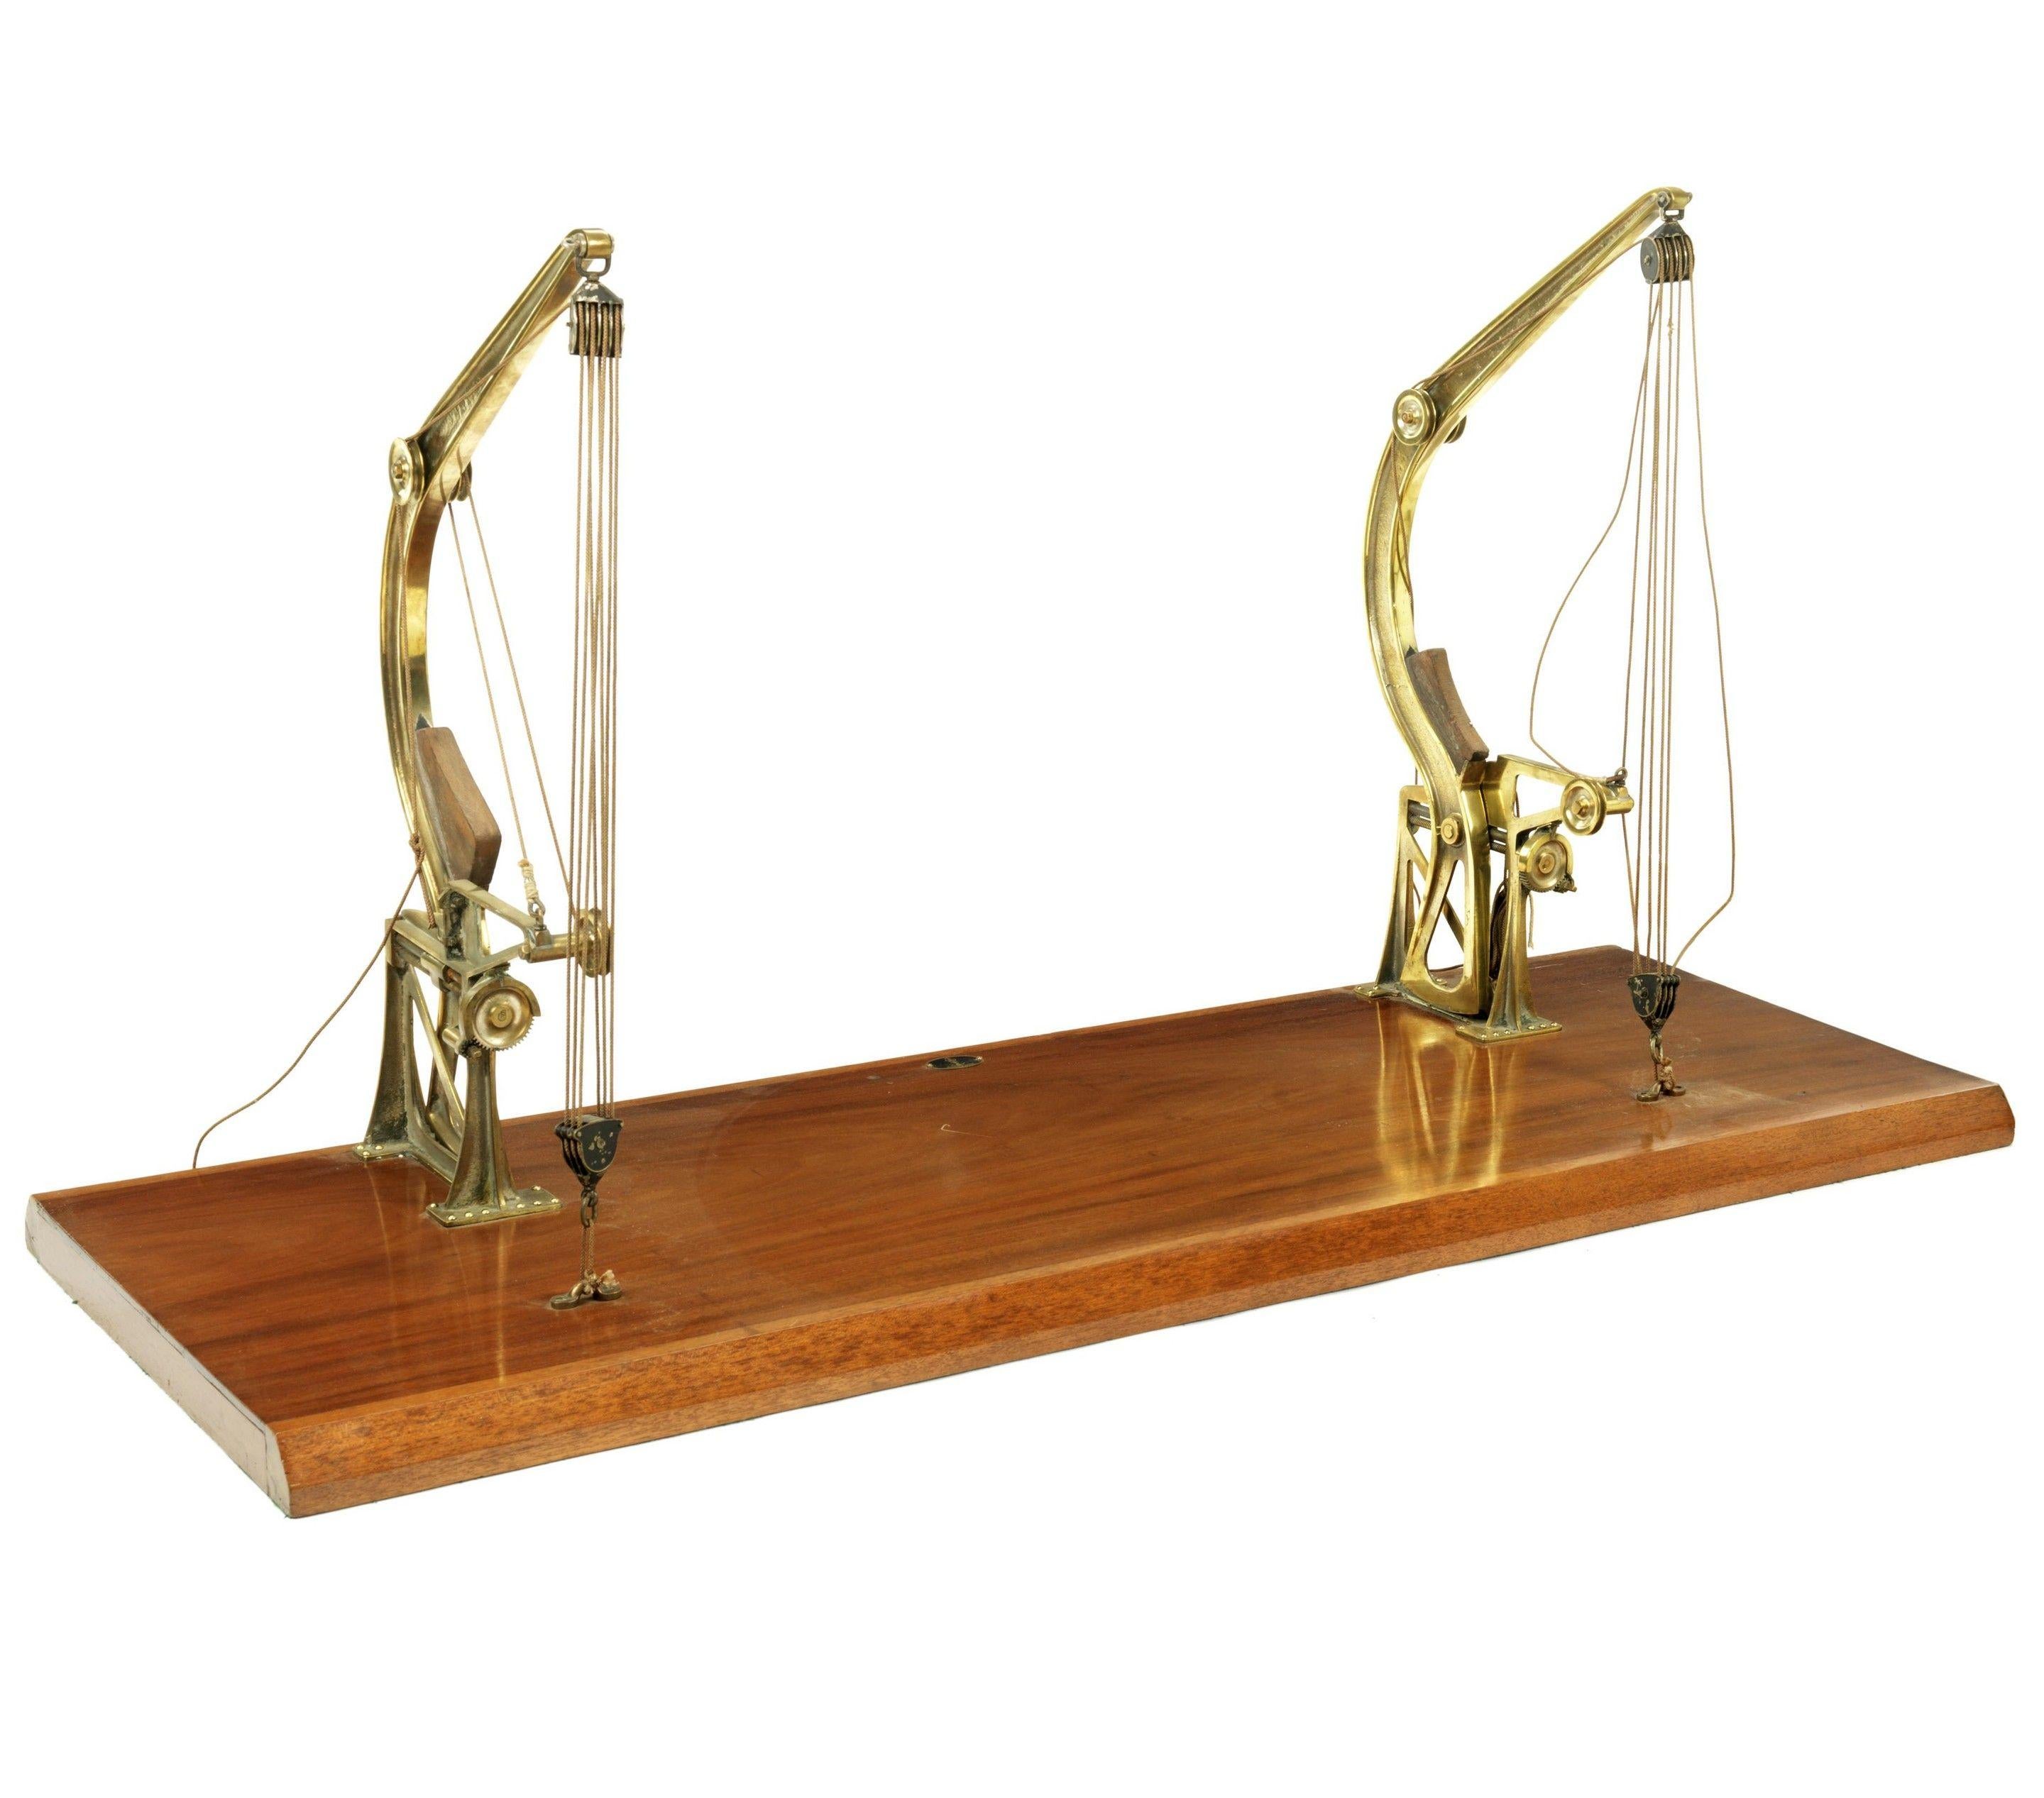 A late 19th century model of a pair of brass Davit type cranes 
each with corded mechanism, mounted onto a mahogany plinth base, with applied oval brass crown and anchor Admiralty plate.